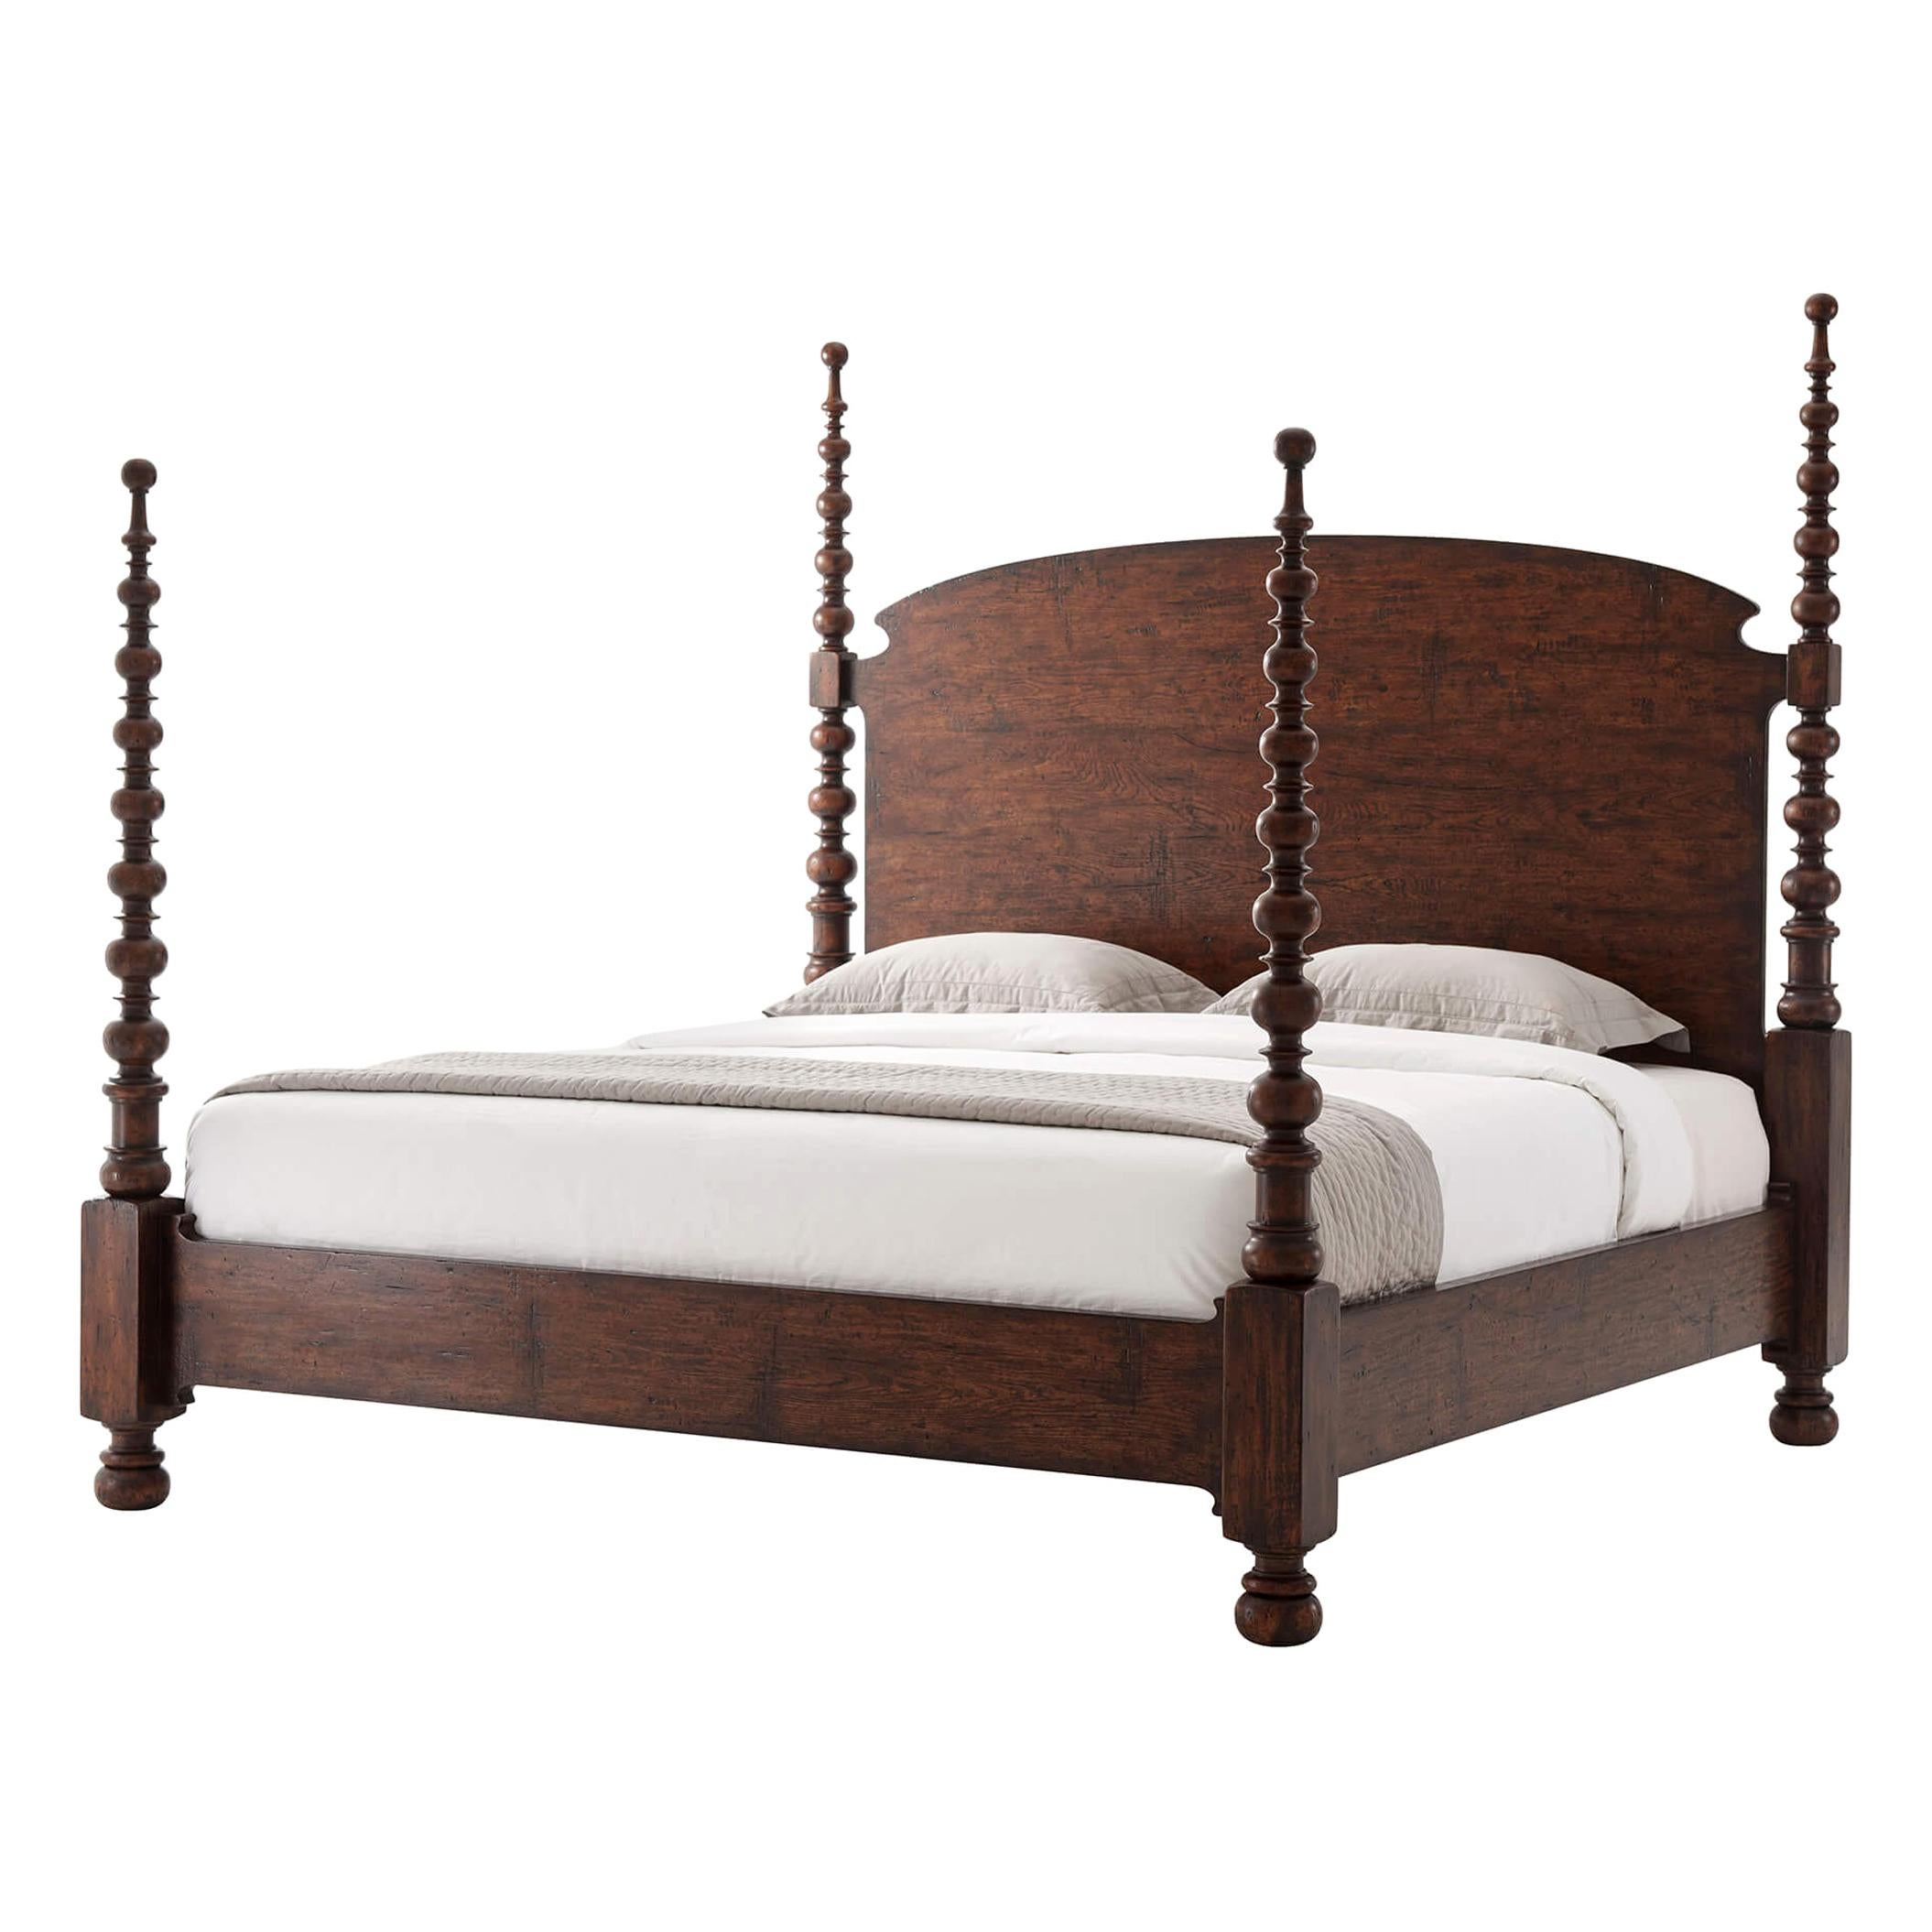 English Country King Bed For At, Country Style King Bed Frames With Headboards